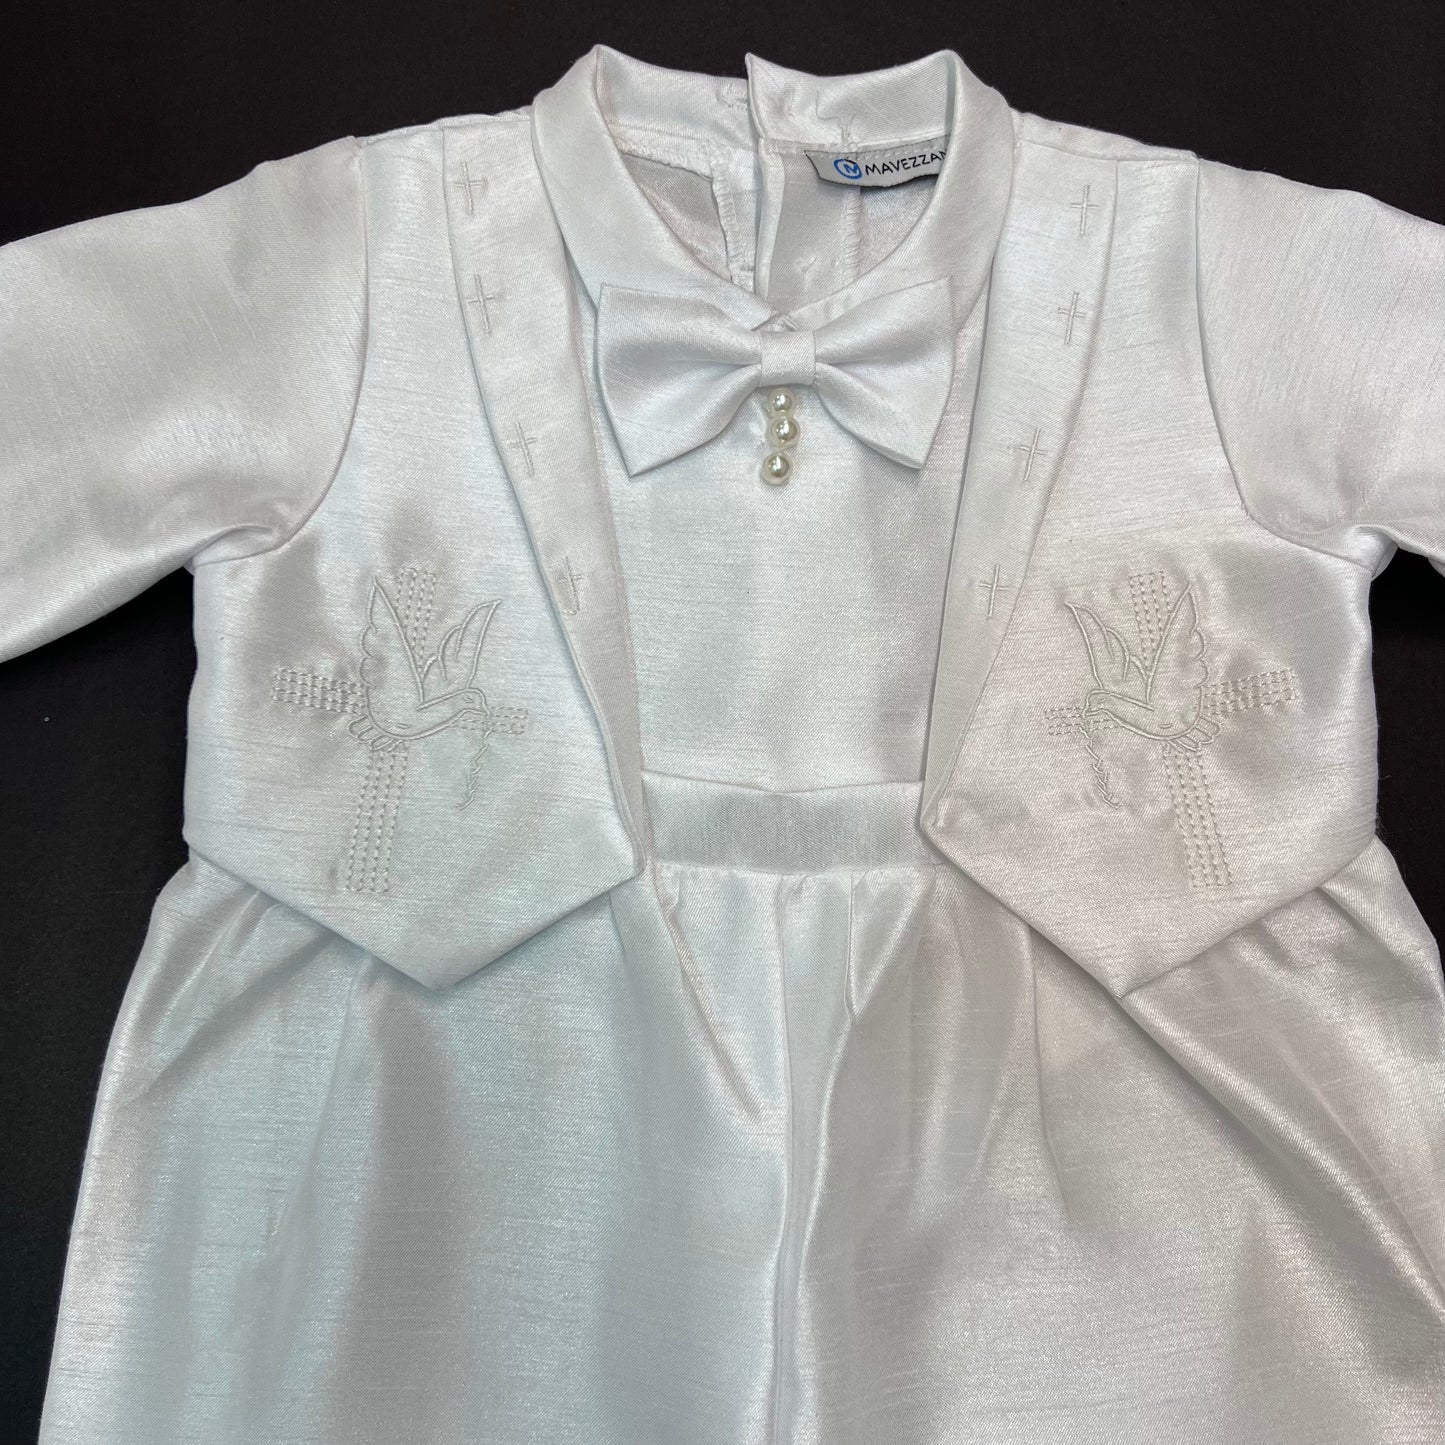 One-Piece Embroidered Baptism Outfit